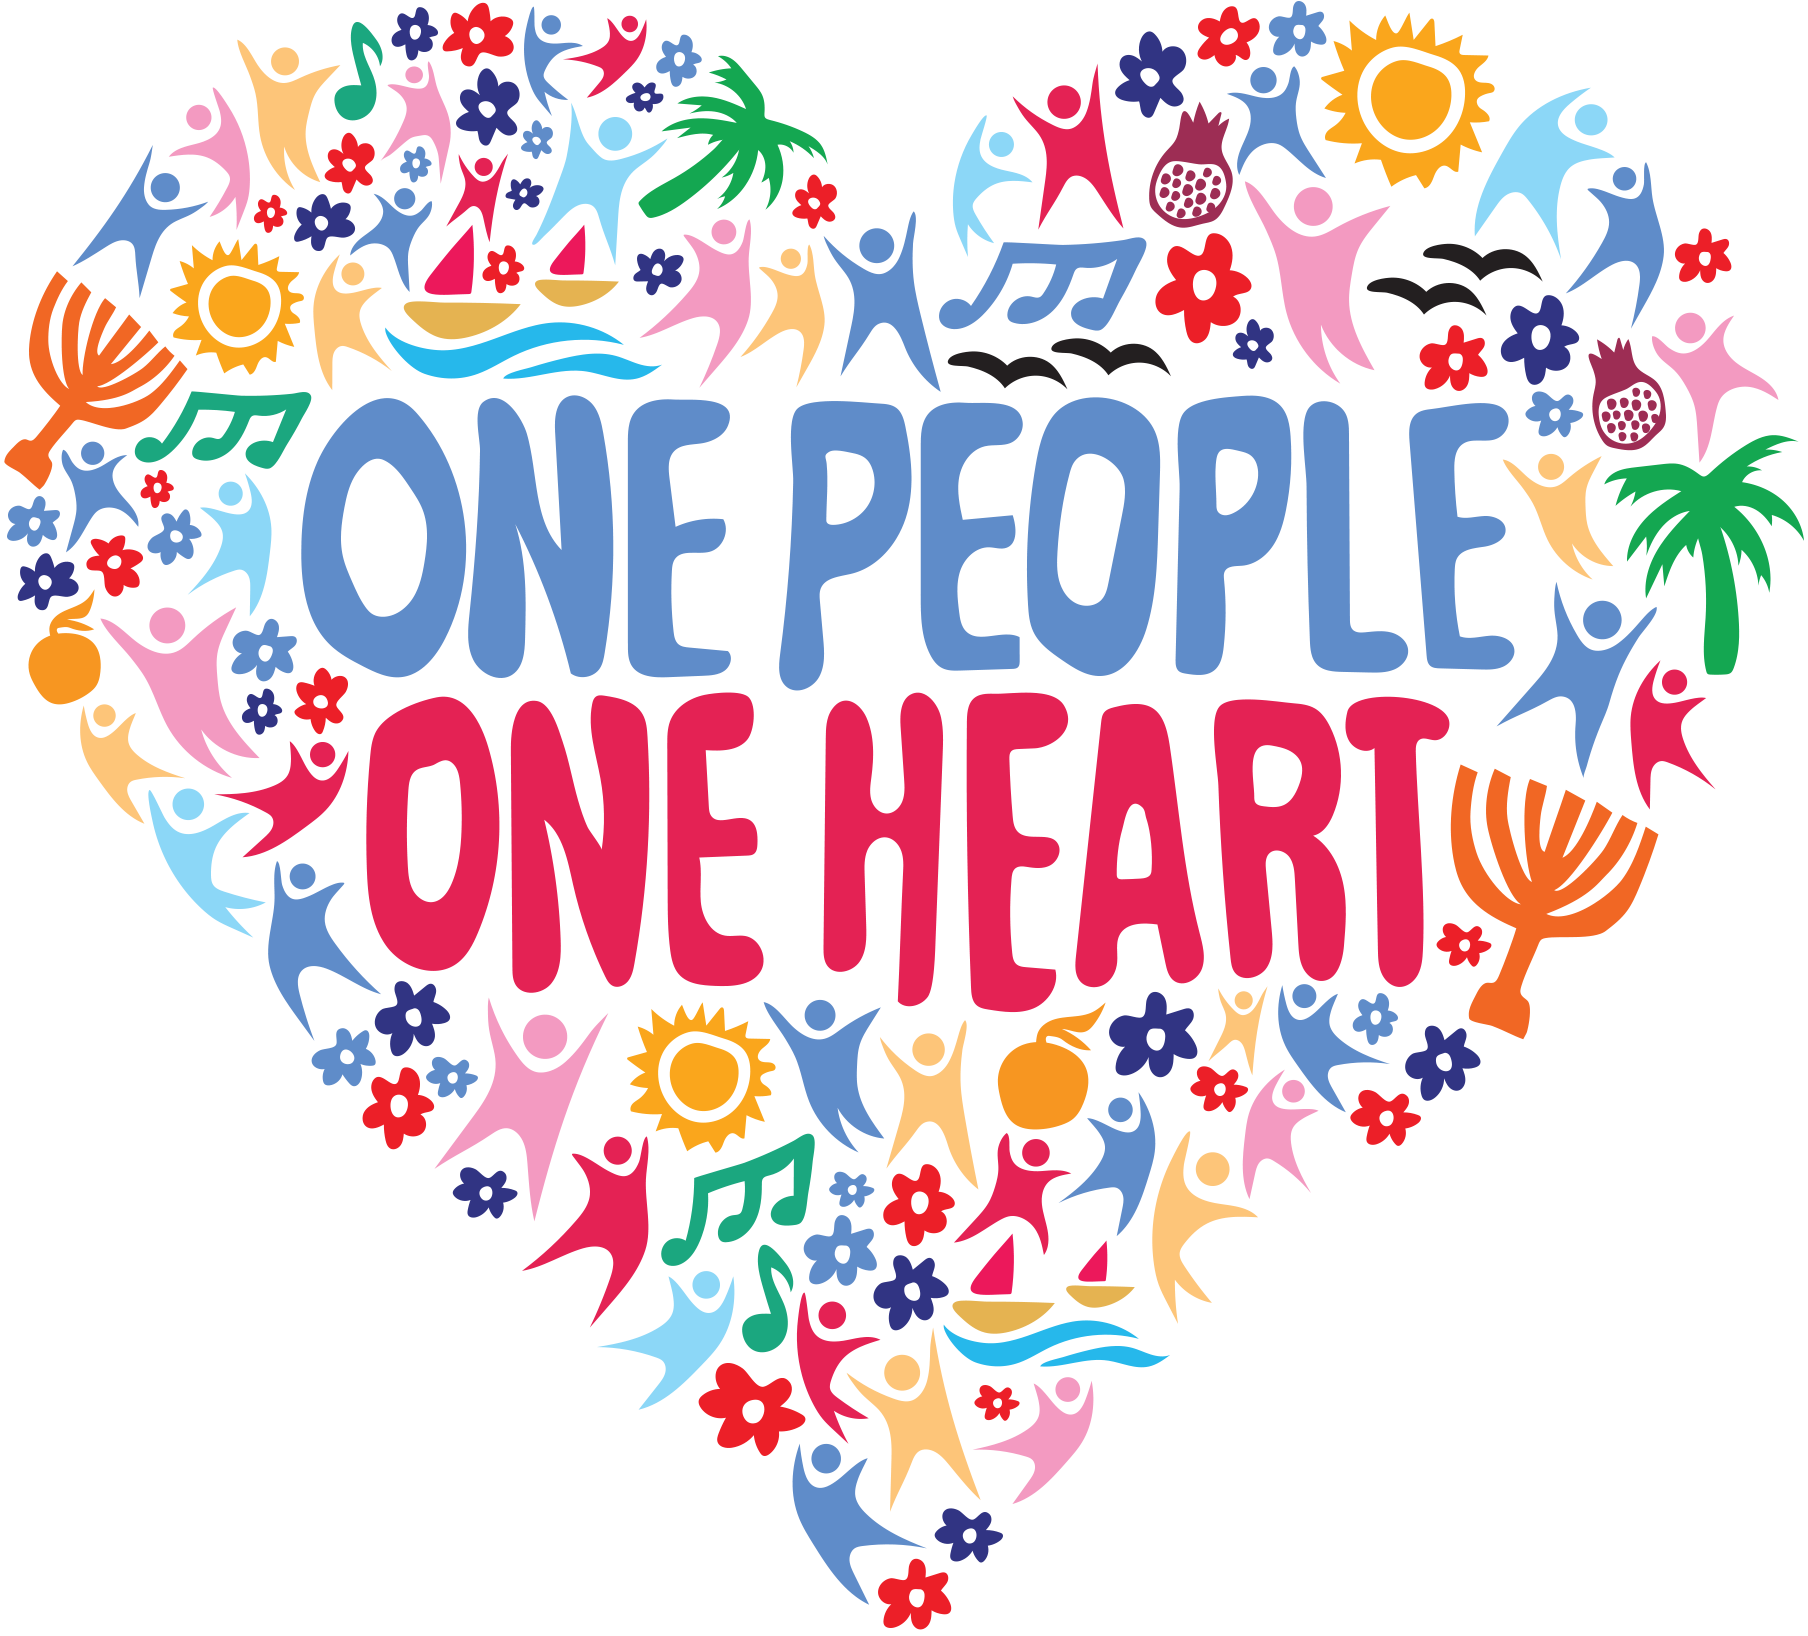 Heart with One People, One Heart